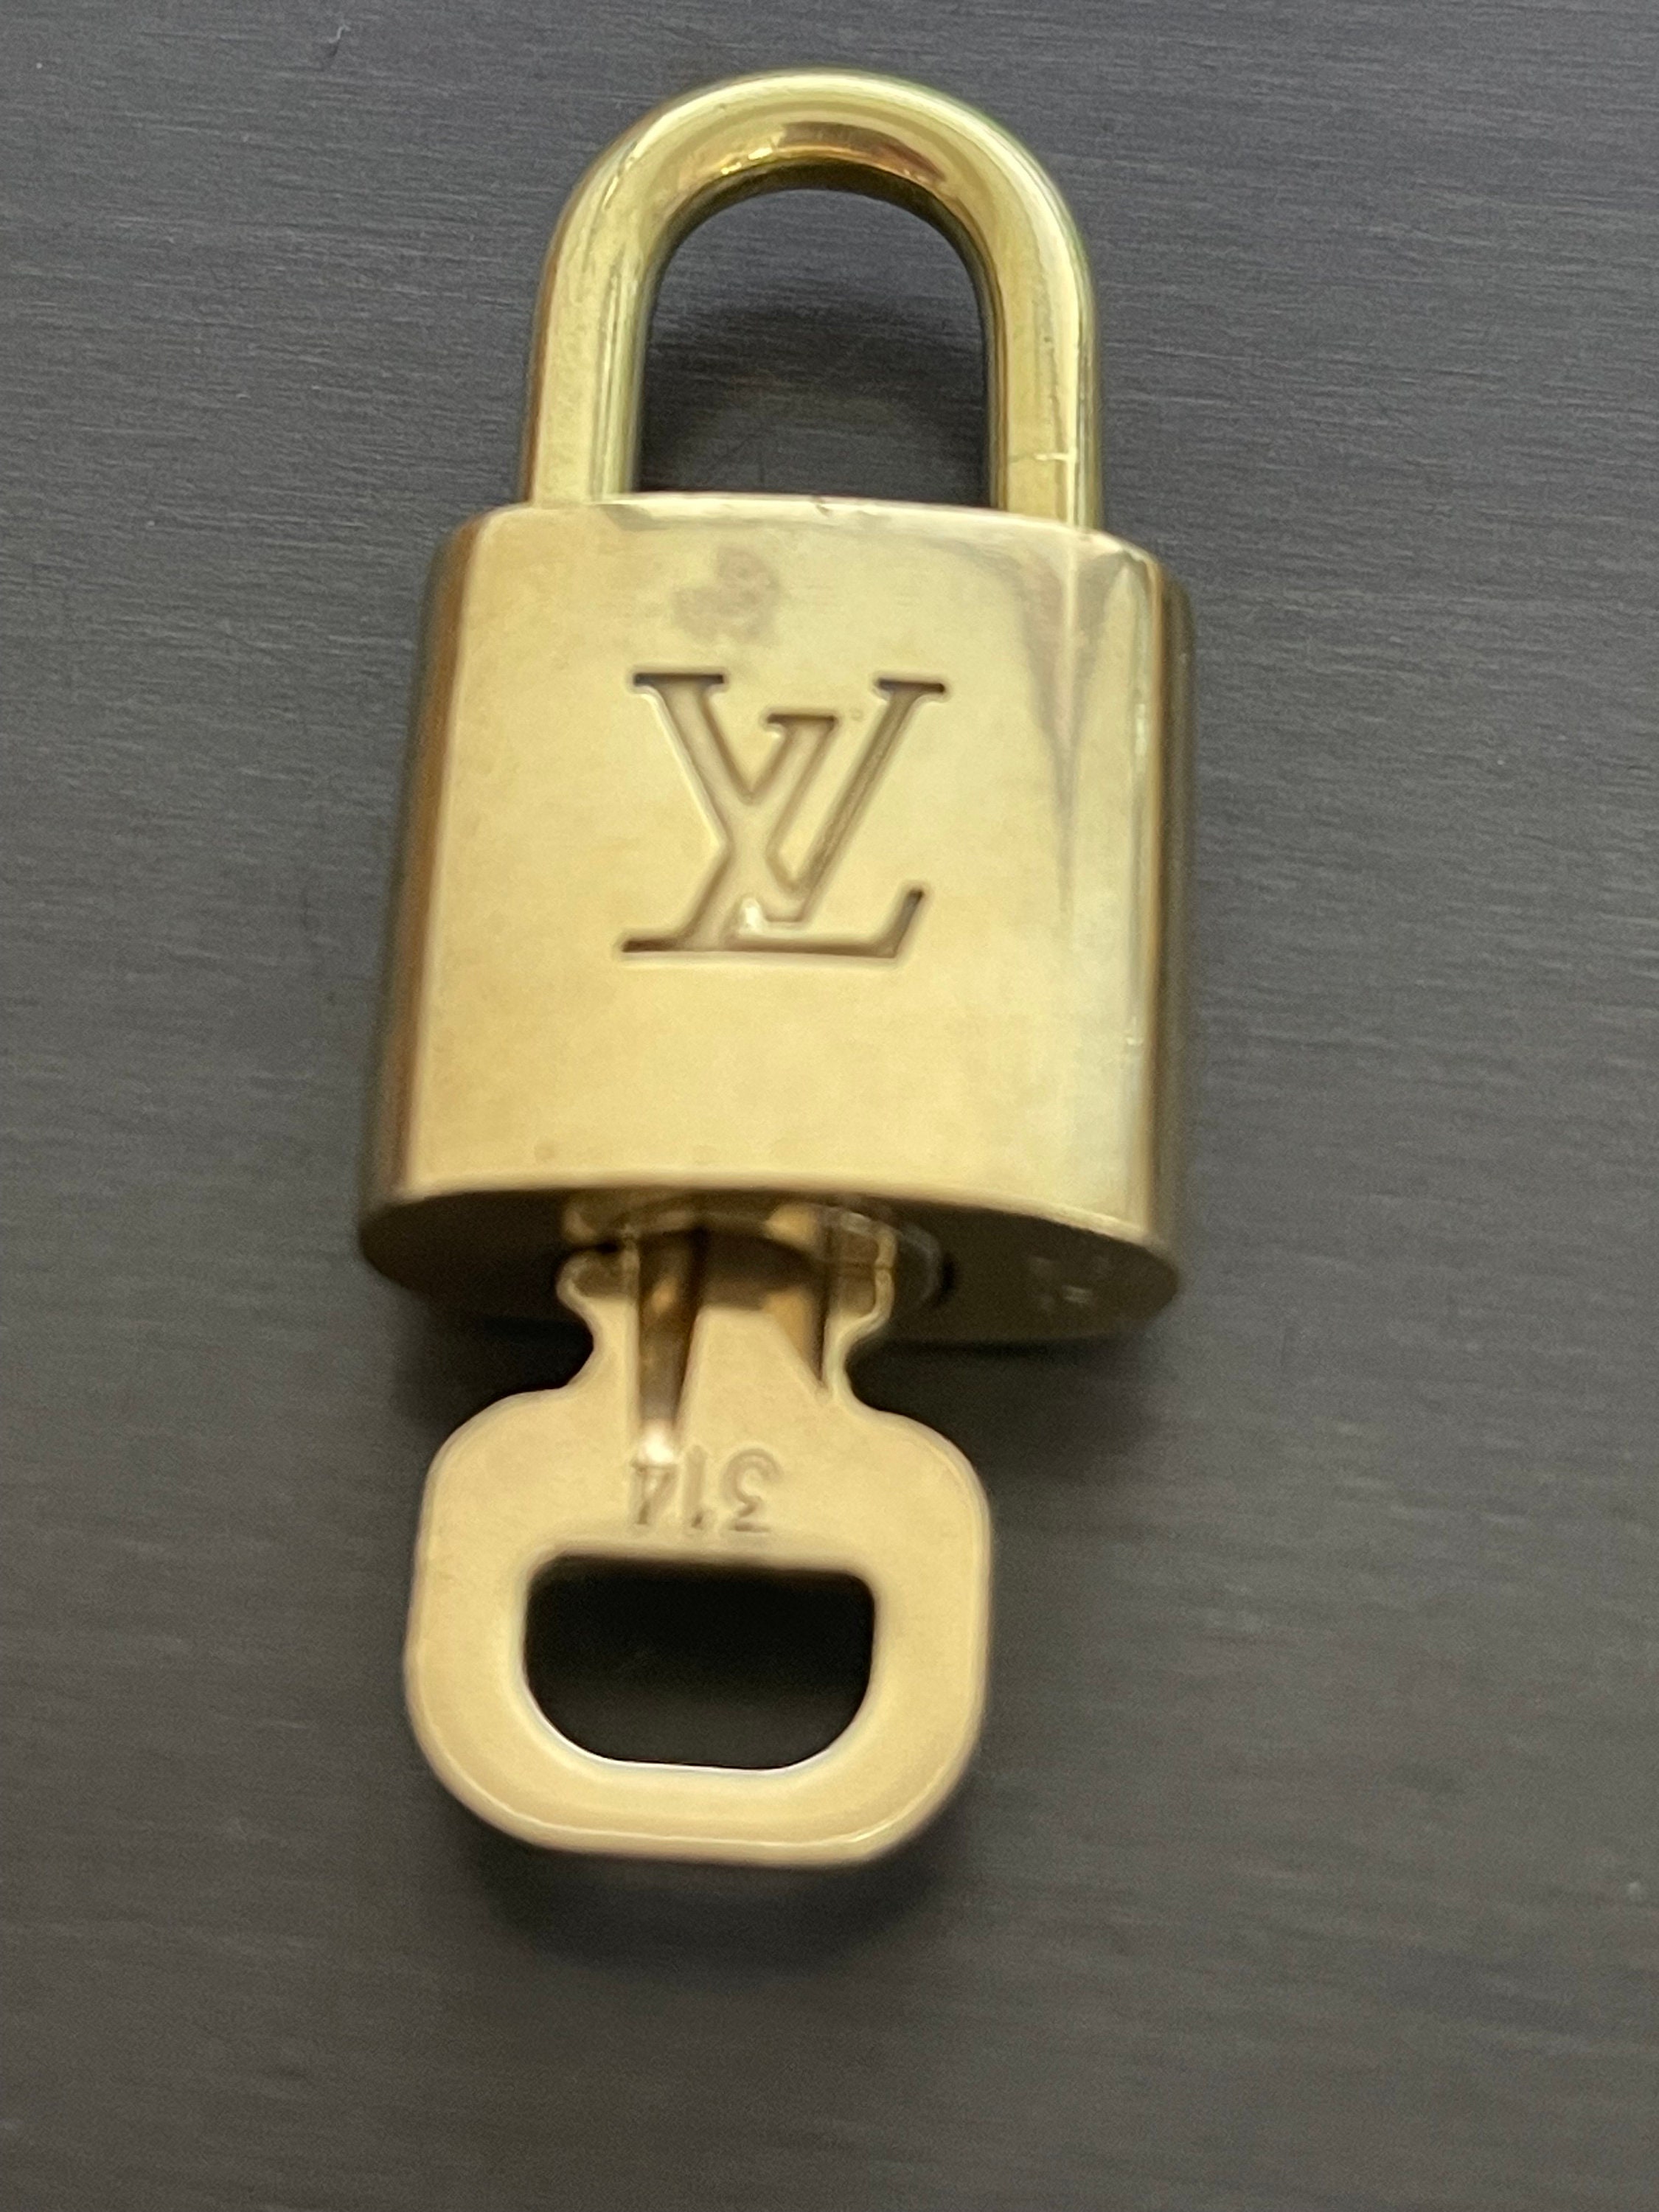 Pinkerly Special Louis Vuitton Padlock and One Key 314 Lock 